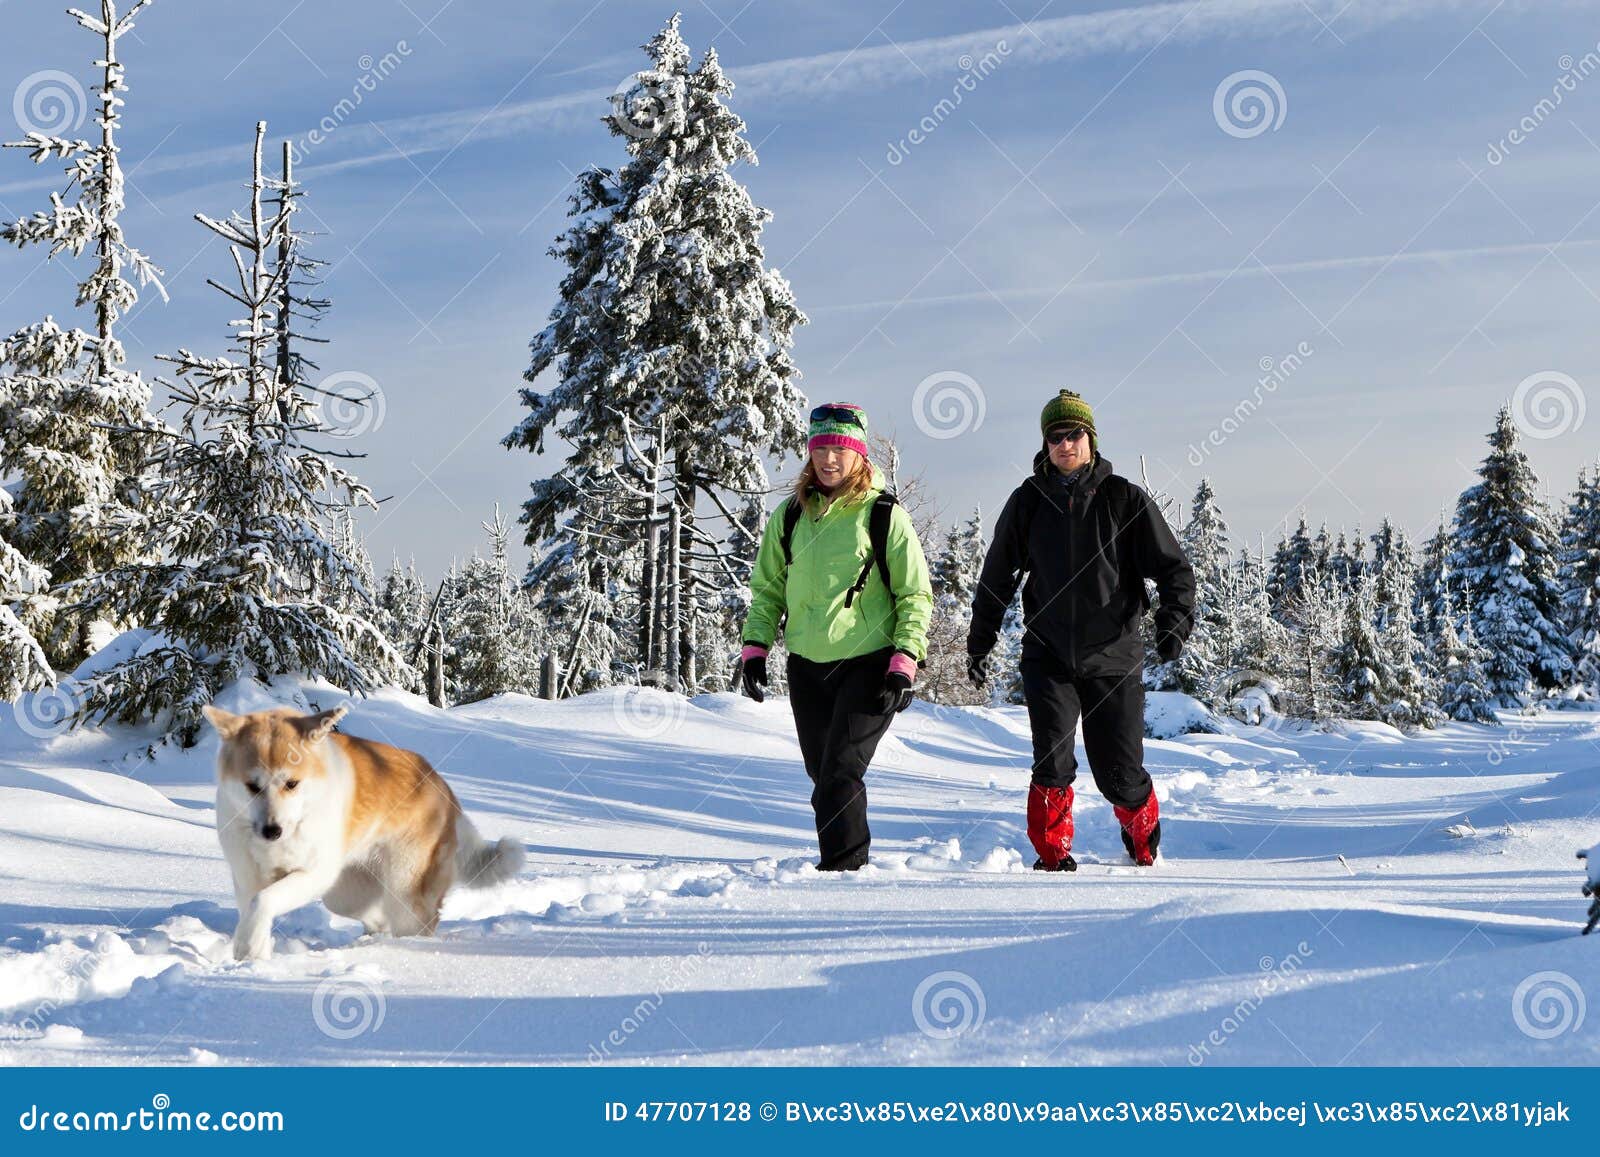 couple hiking with dog in winter mountains